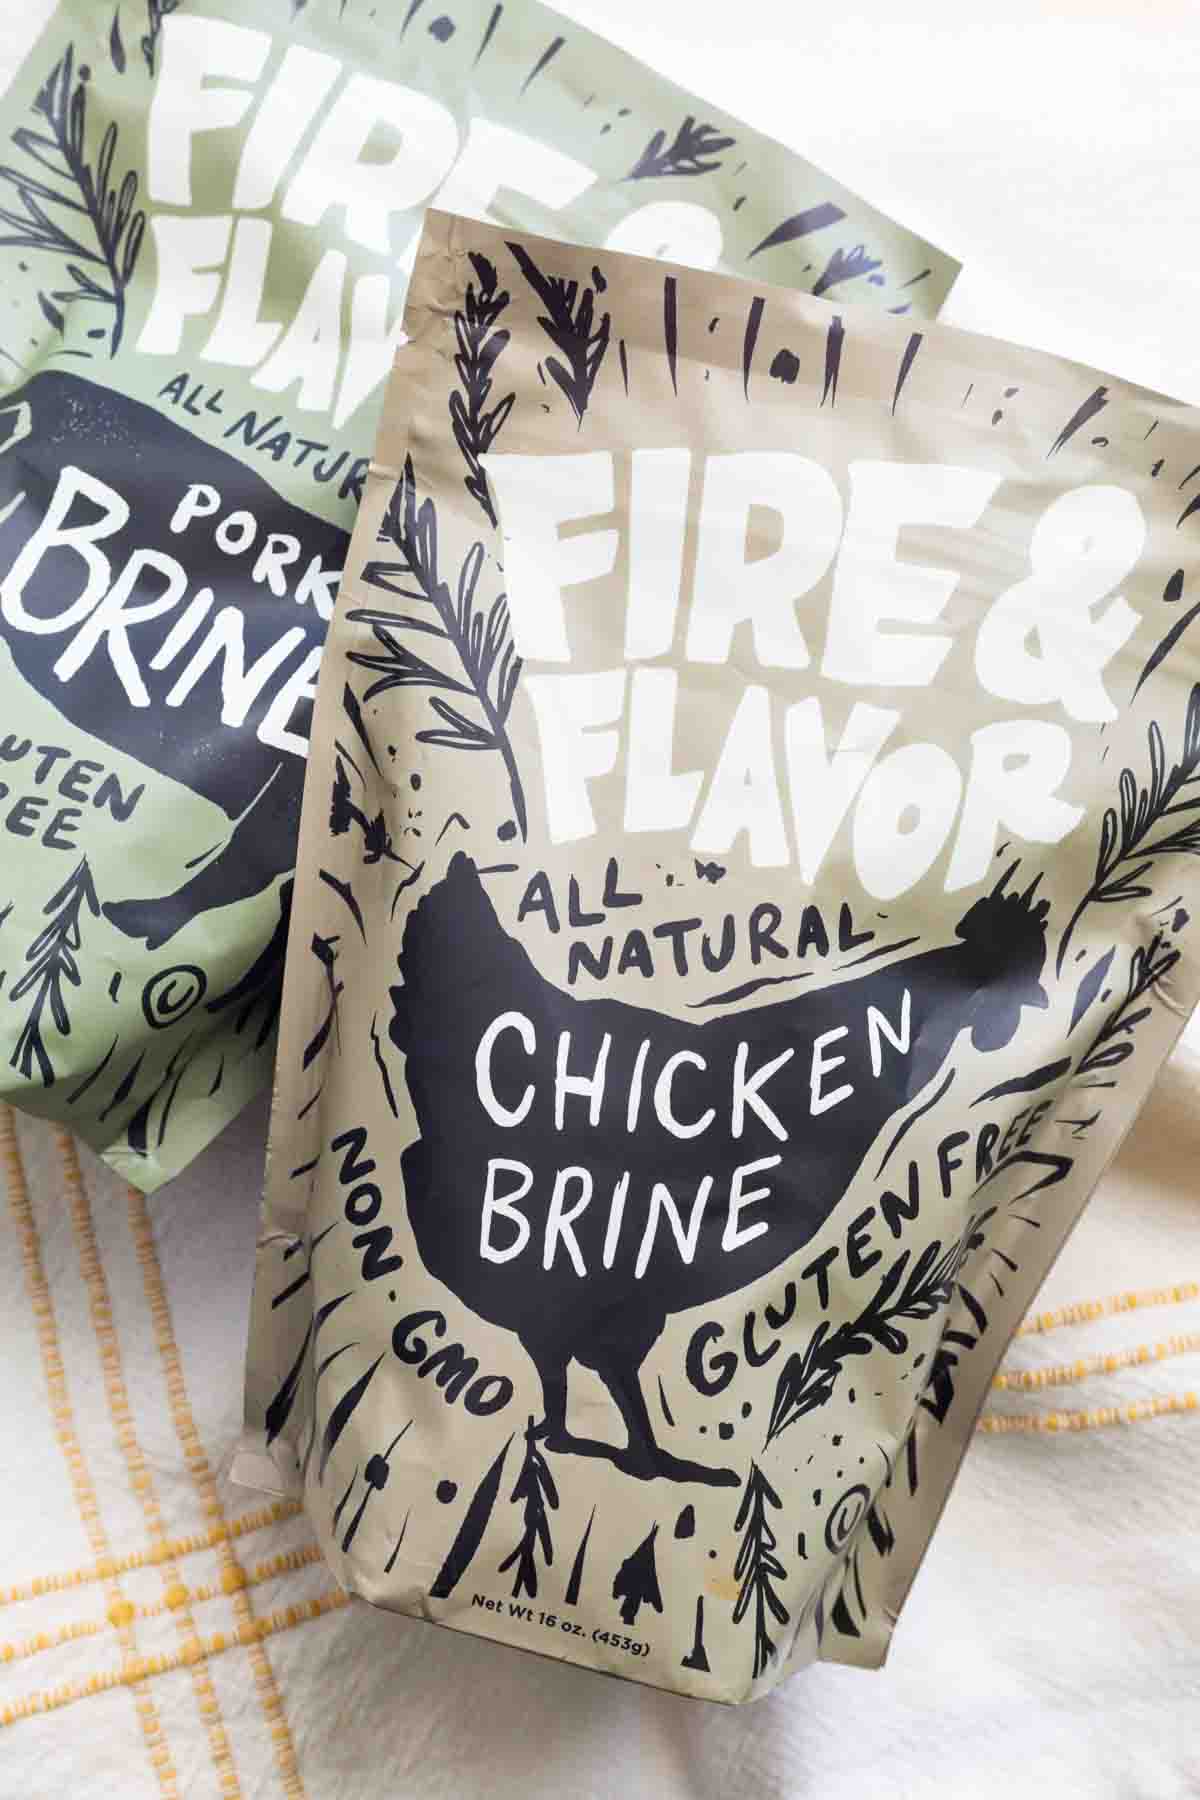 Brine mix varieties from Fire and Flavor